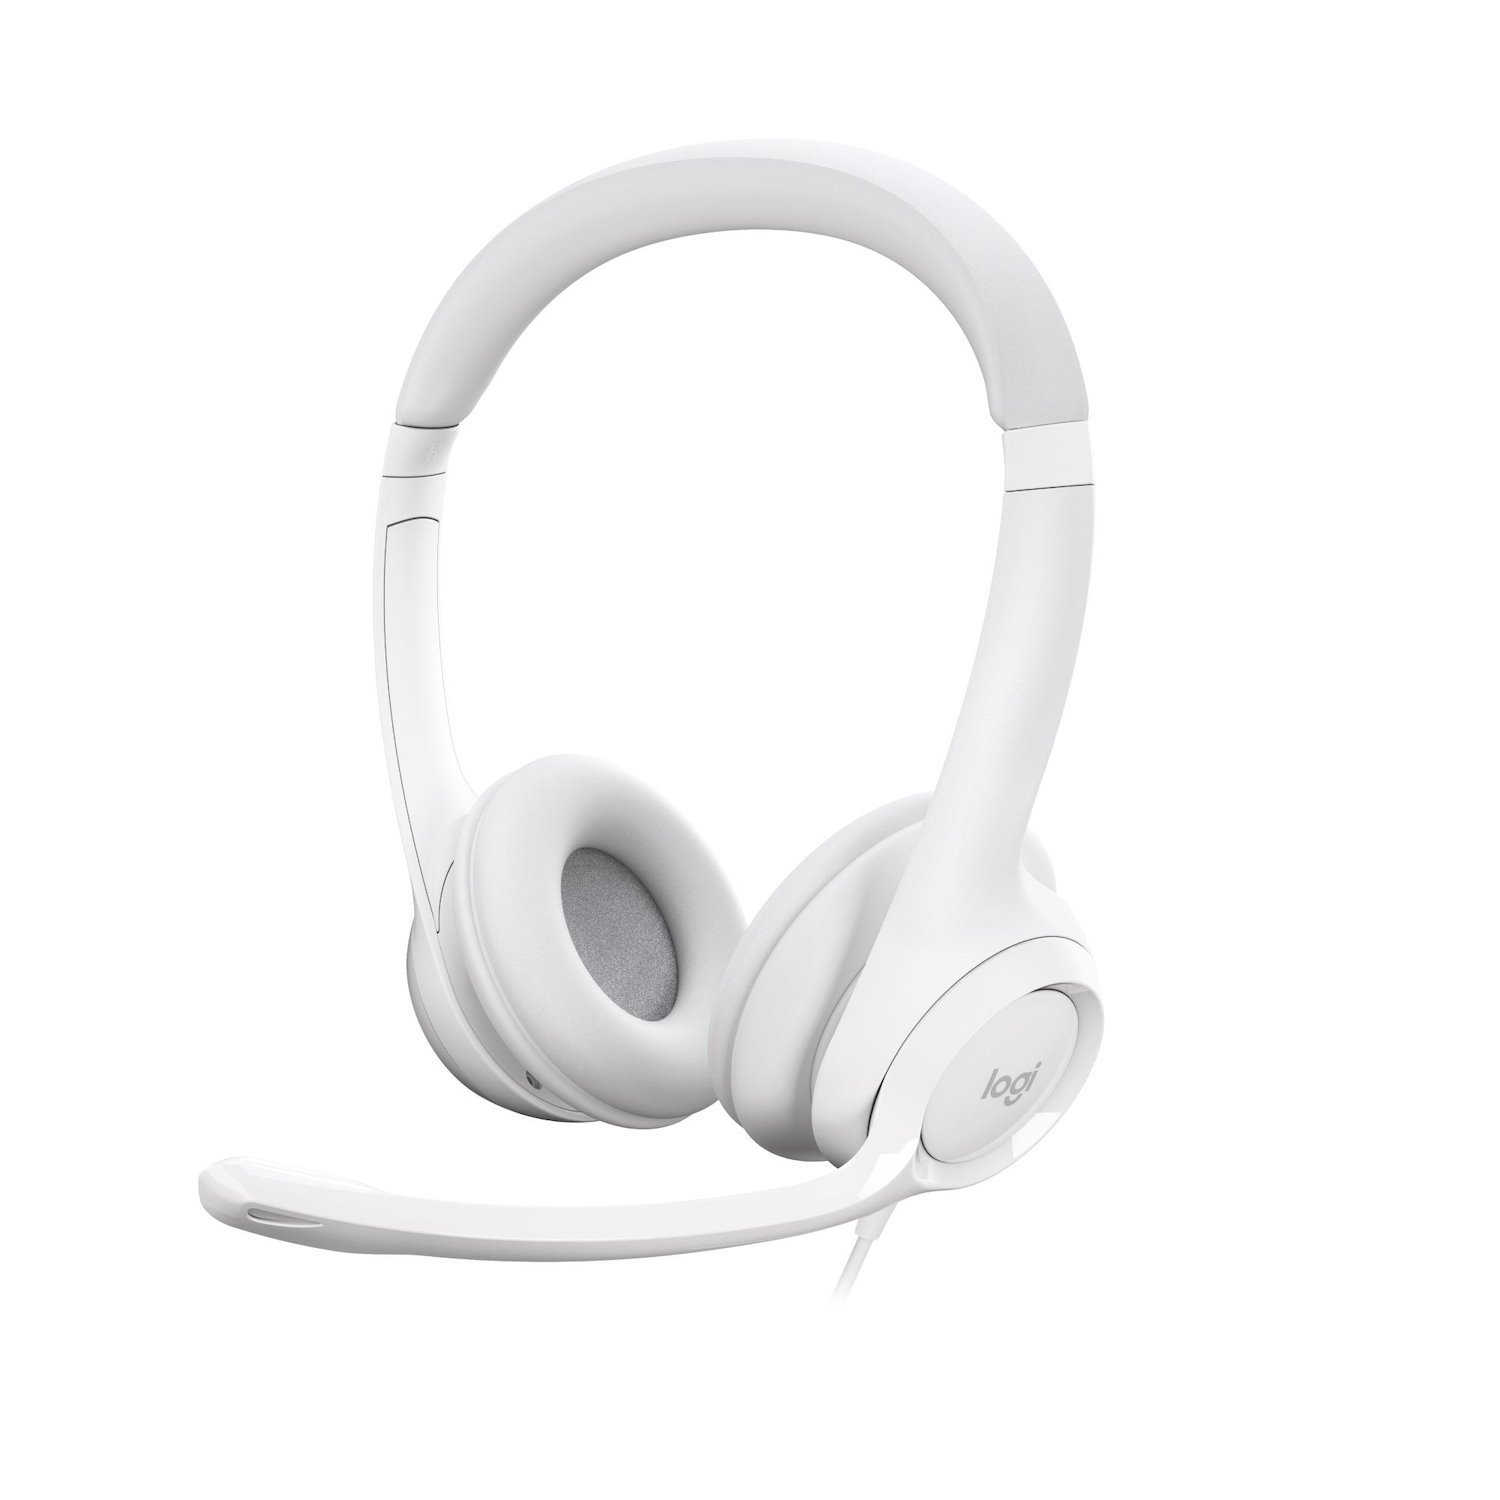 Logitech H390 Wired Over-the-head Headset - Off White